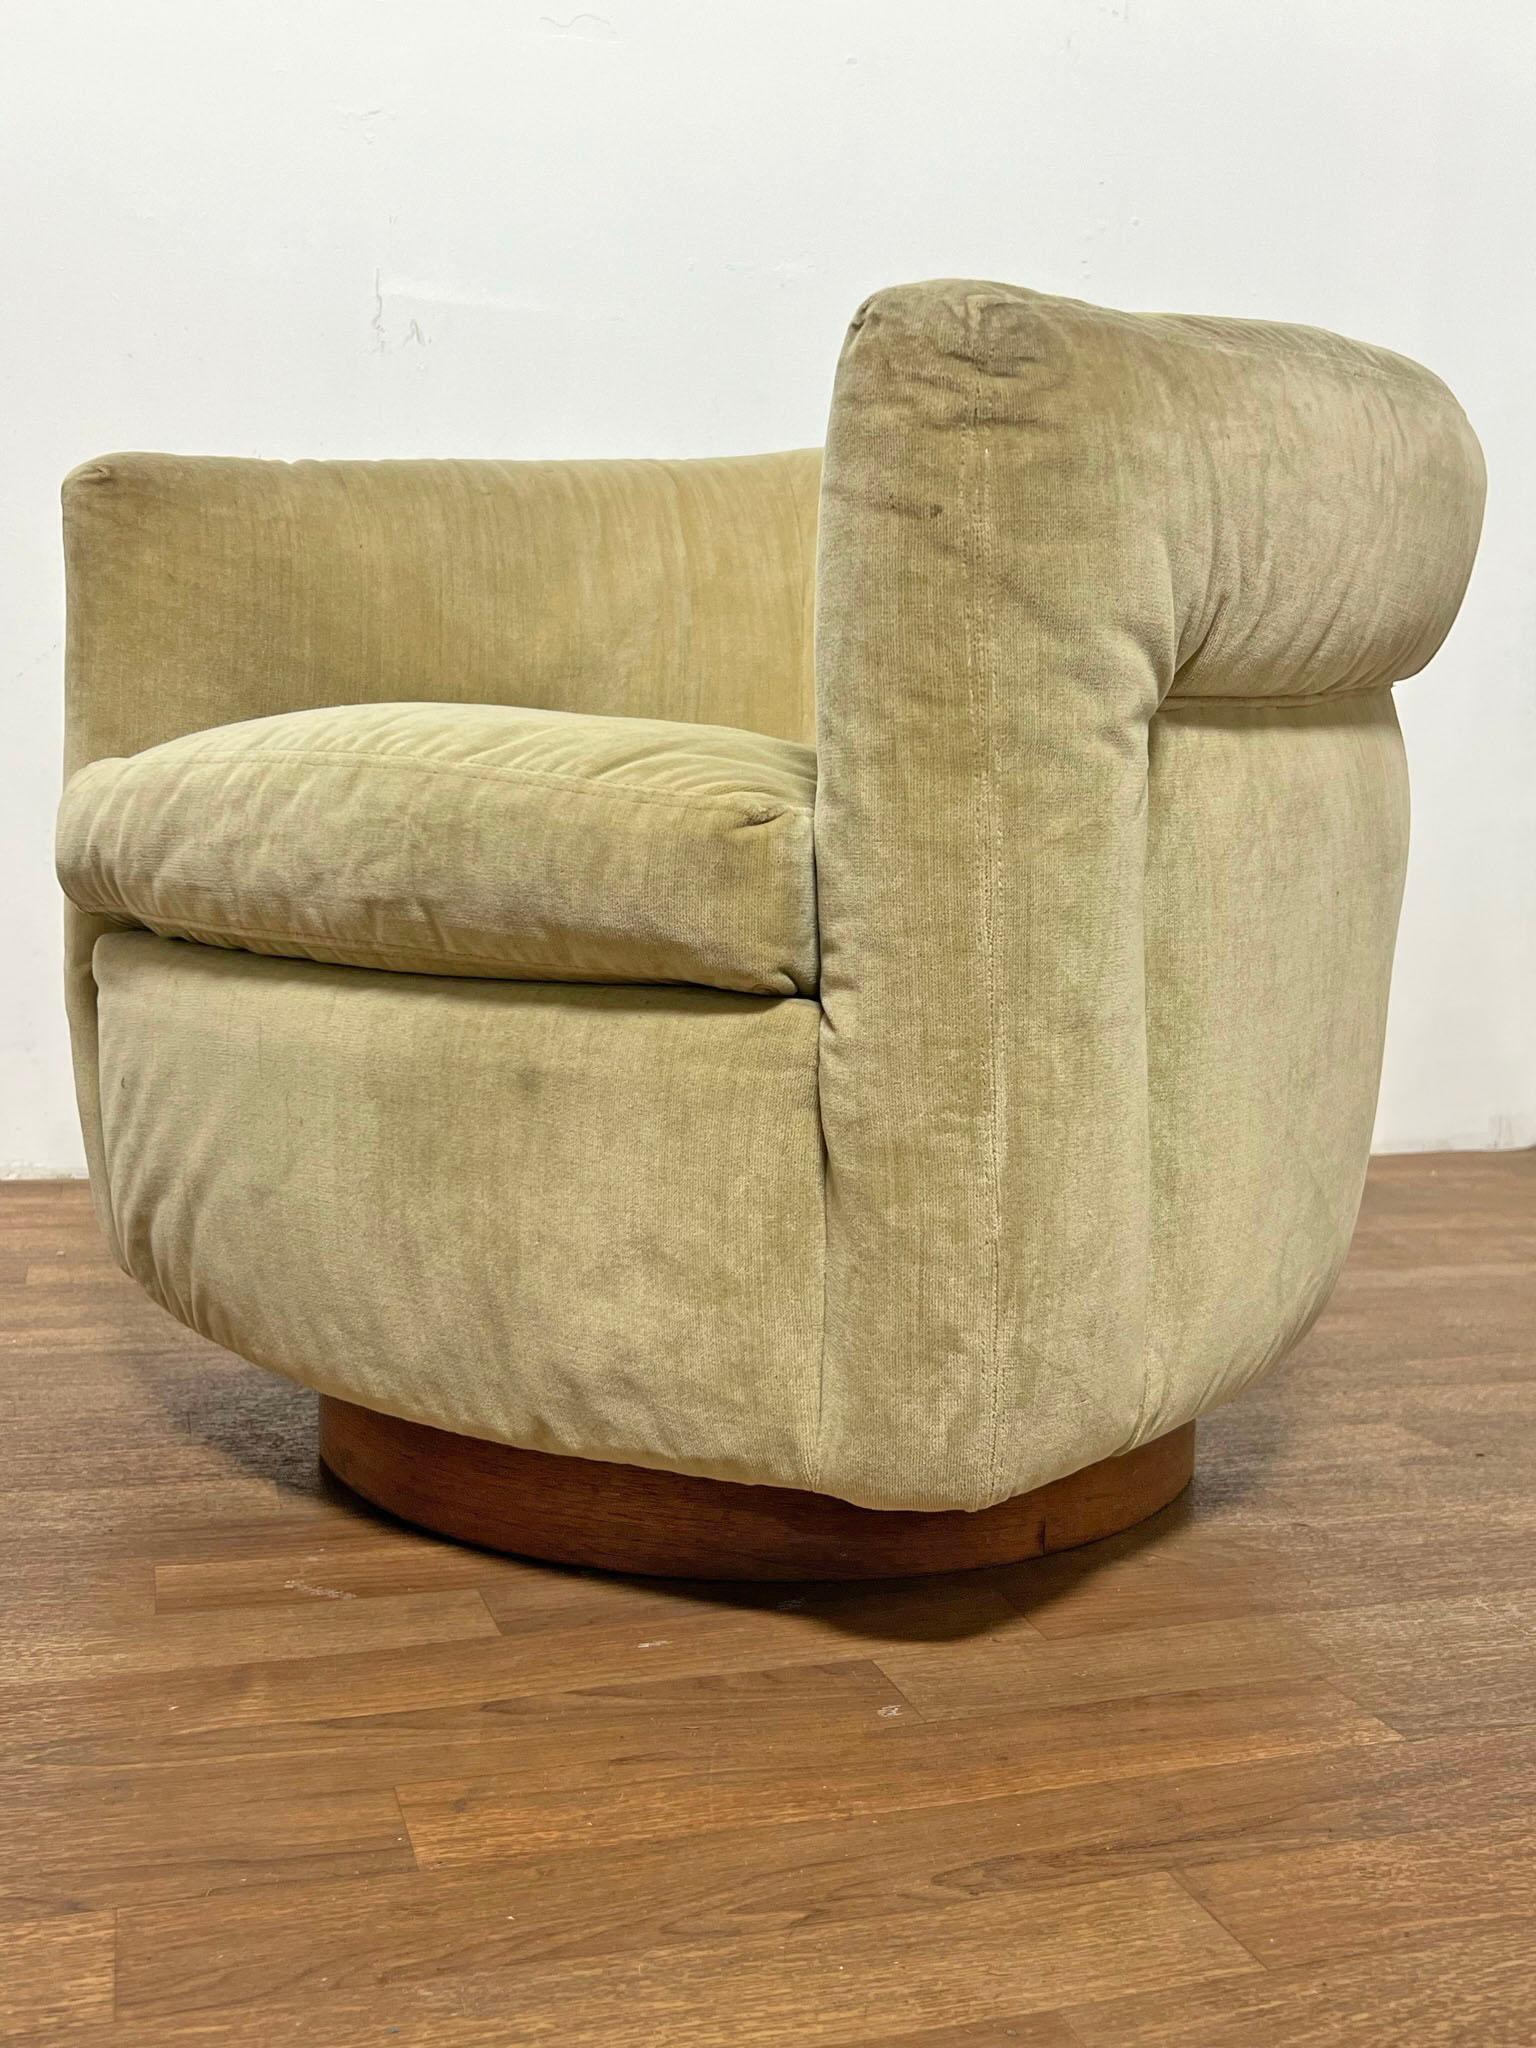 Pair of classic tub lounge chairs designed by Milo Baughman for Thayer Coggin, with walnut bases that swivel and rock. Both retain Thayer Coggin tags, and original order tags from 1972.  Please note a second identical pair from the same estate is